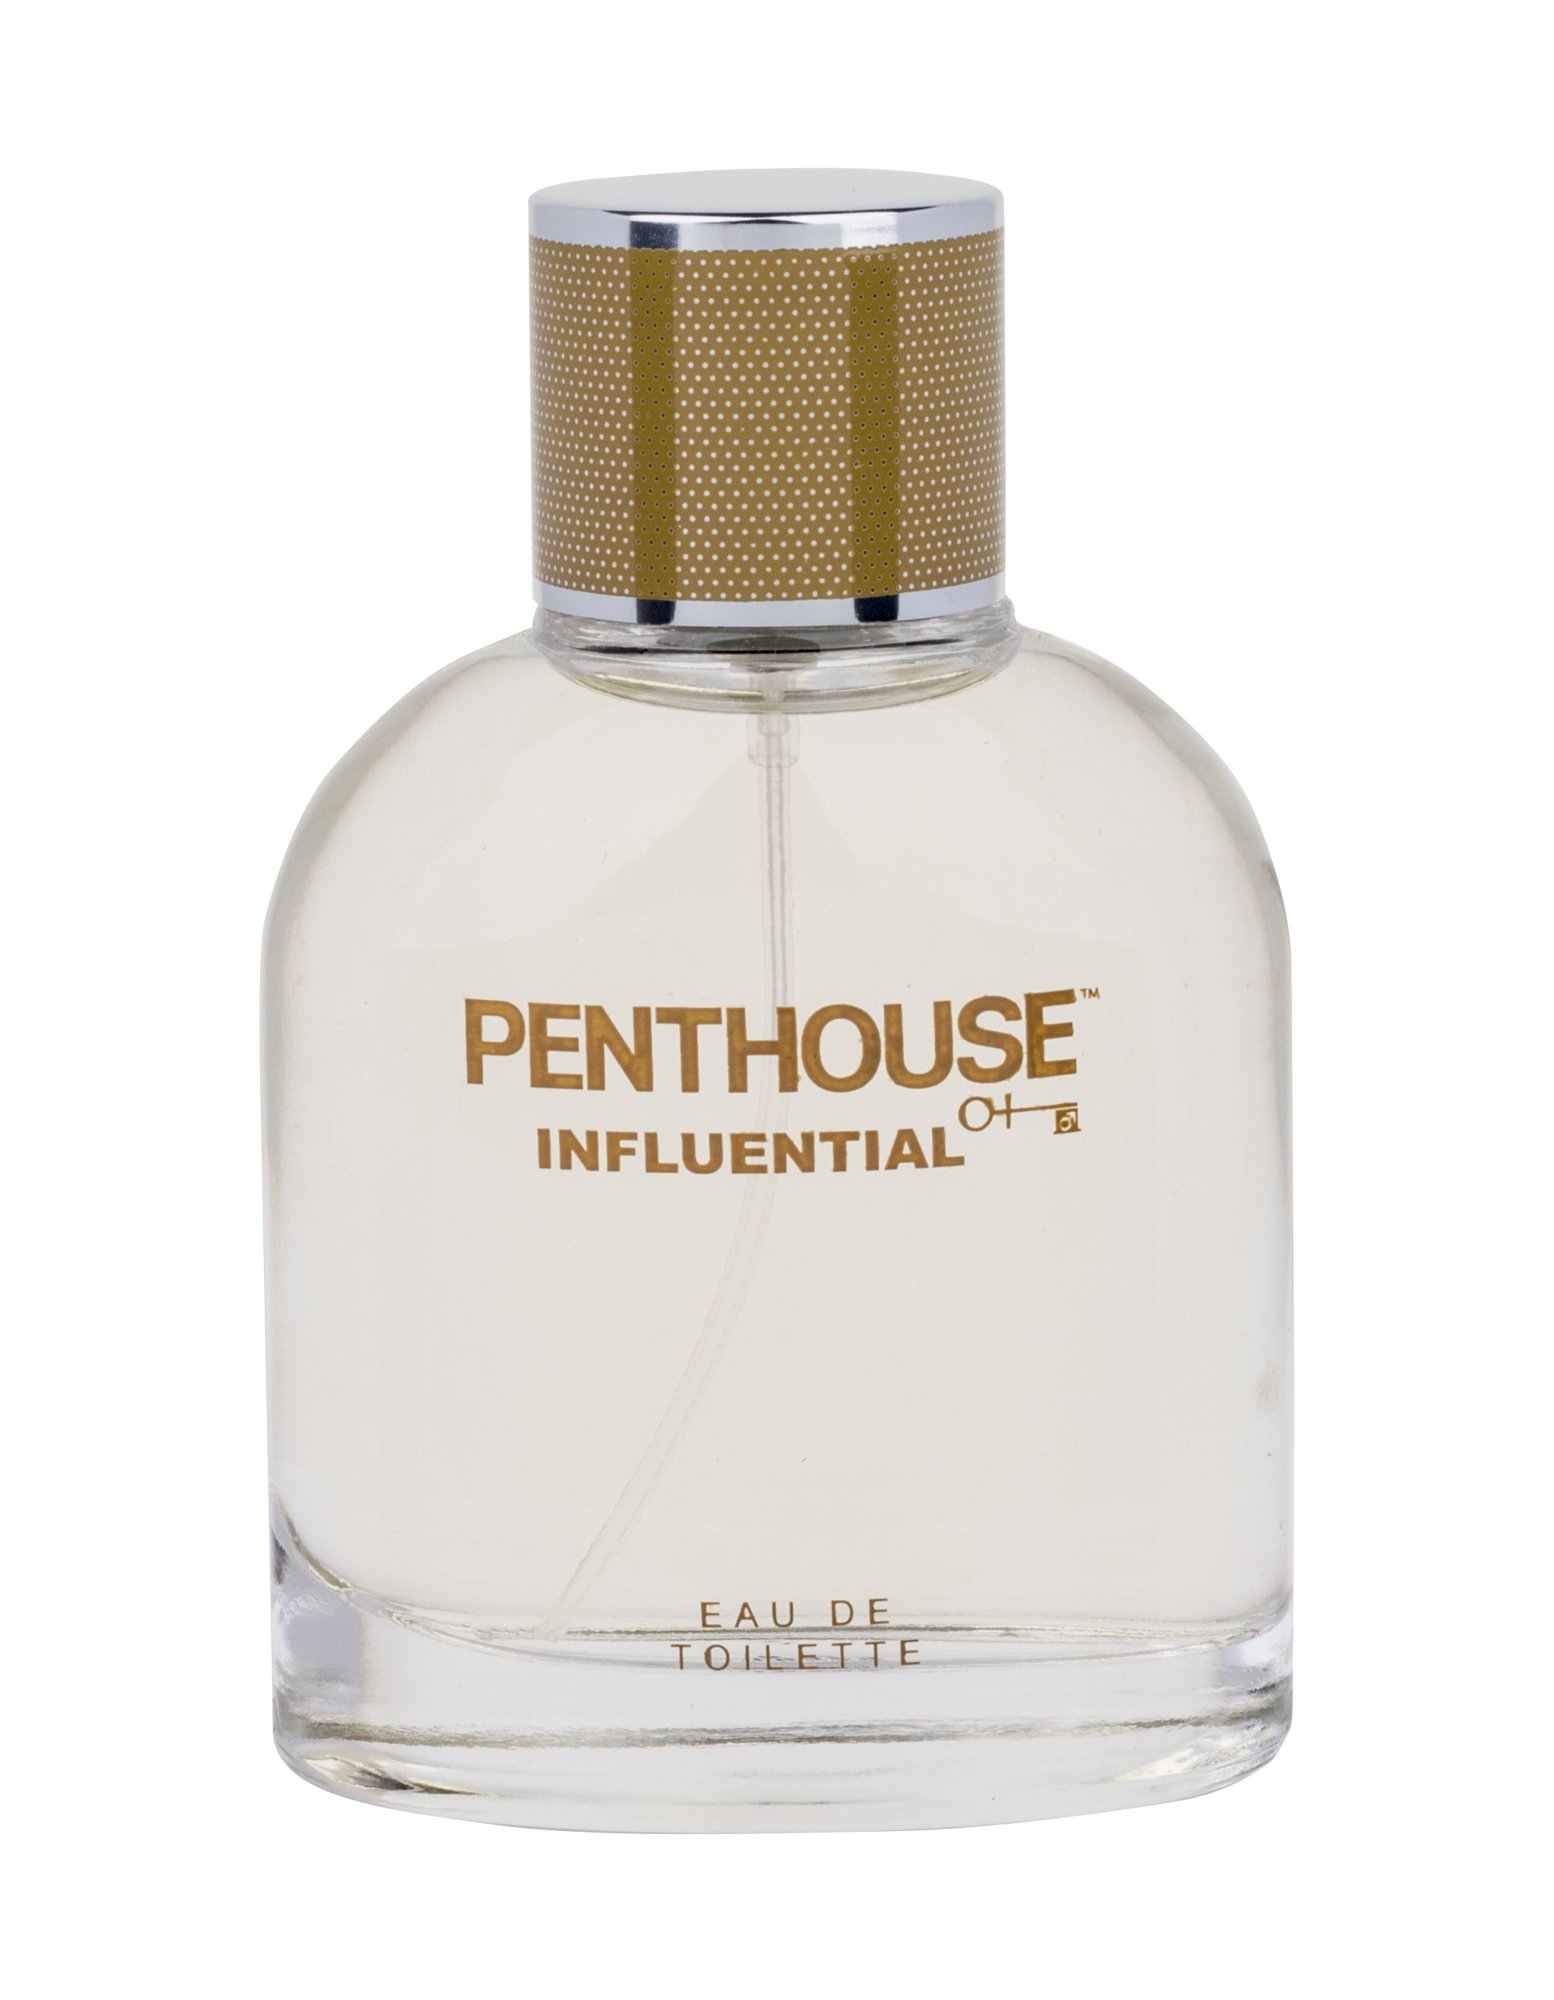 Penthouse Influential